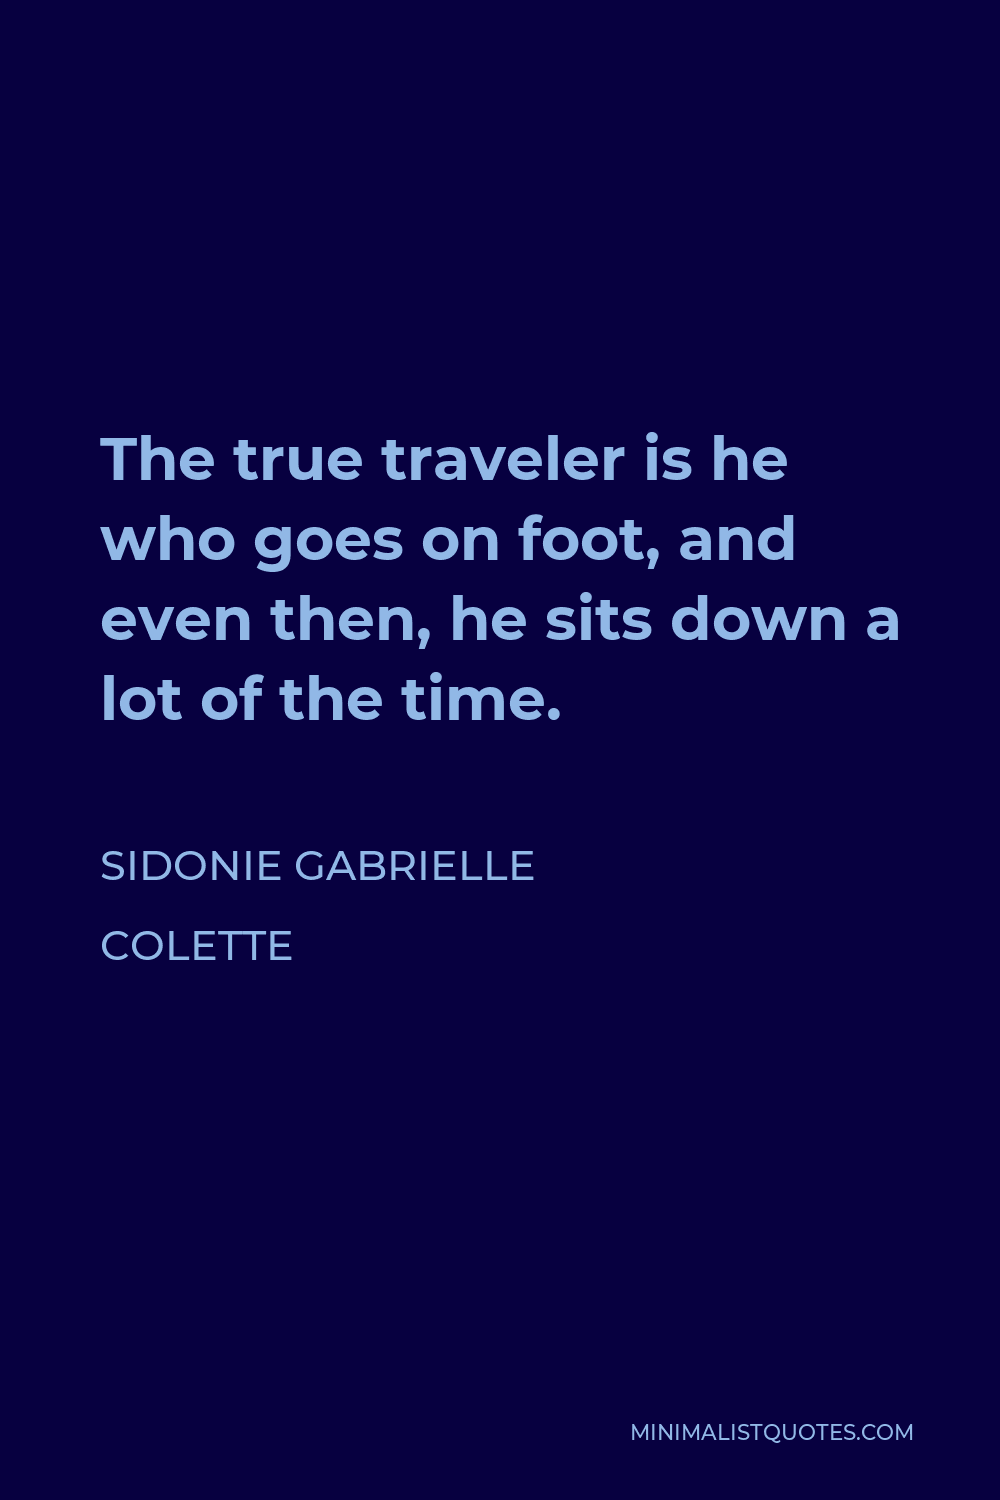 Sidonie Gabrielle Colette Quote - The true traveler is he who goes on foot, and even then, he sits down a lot of the time.